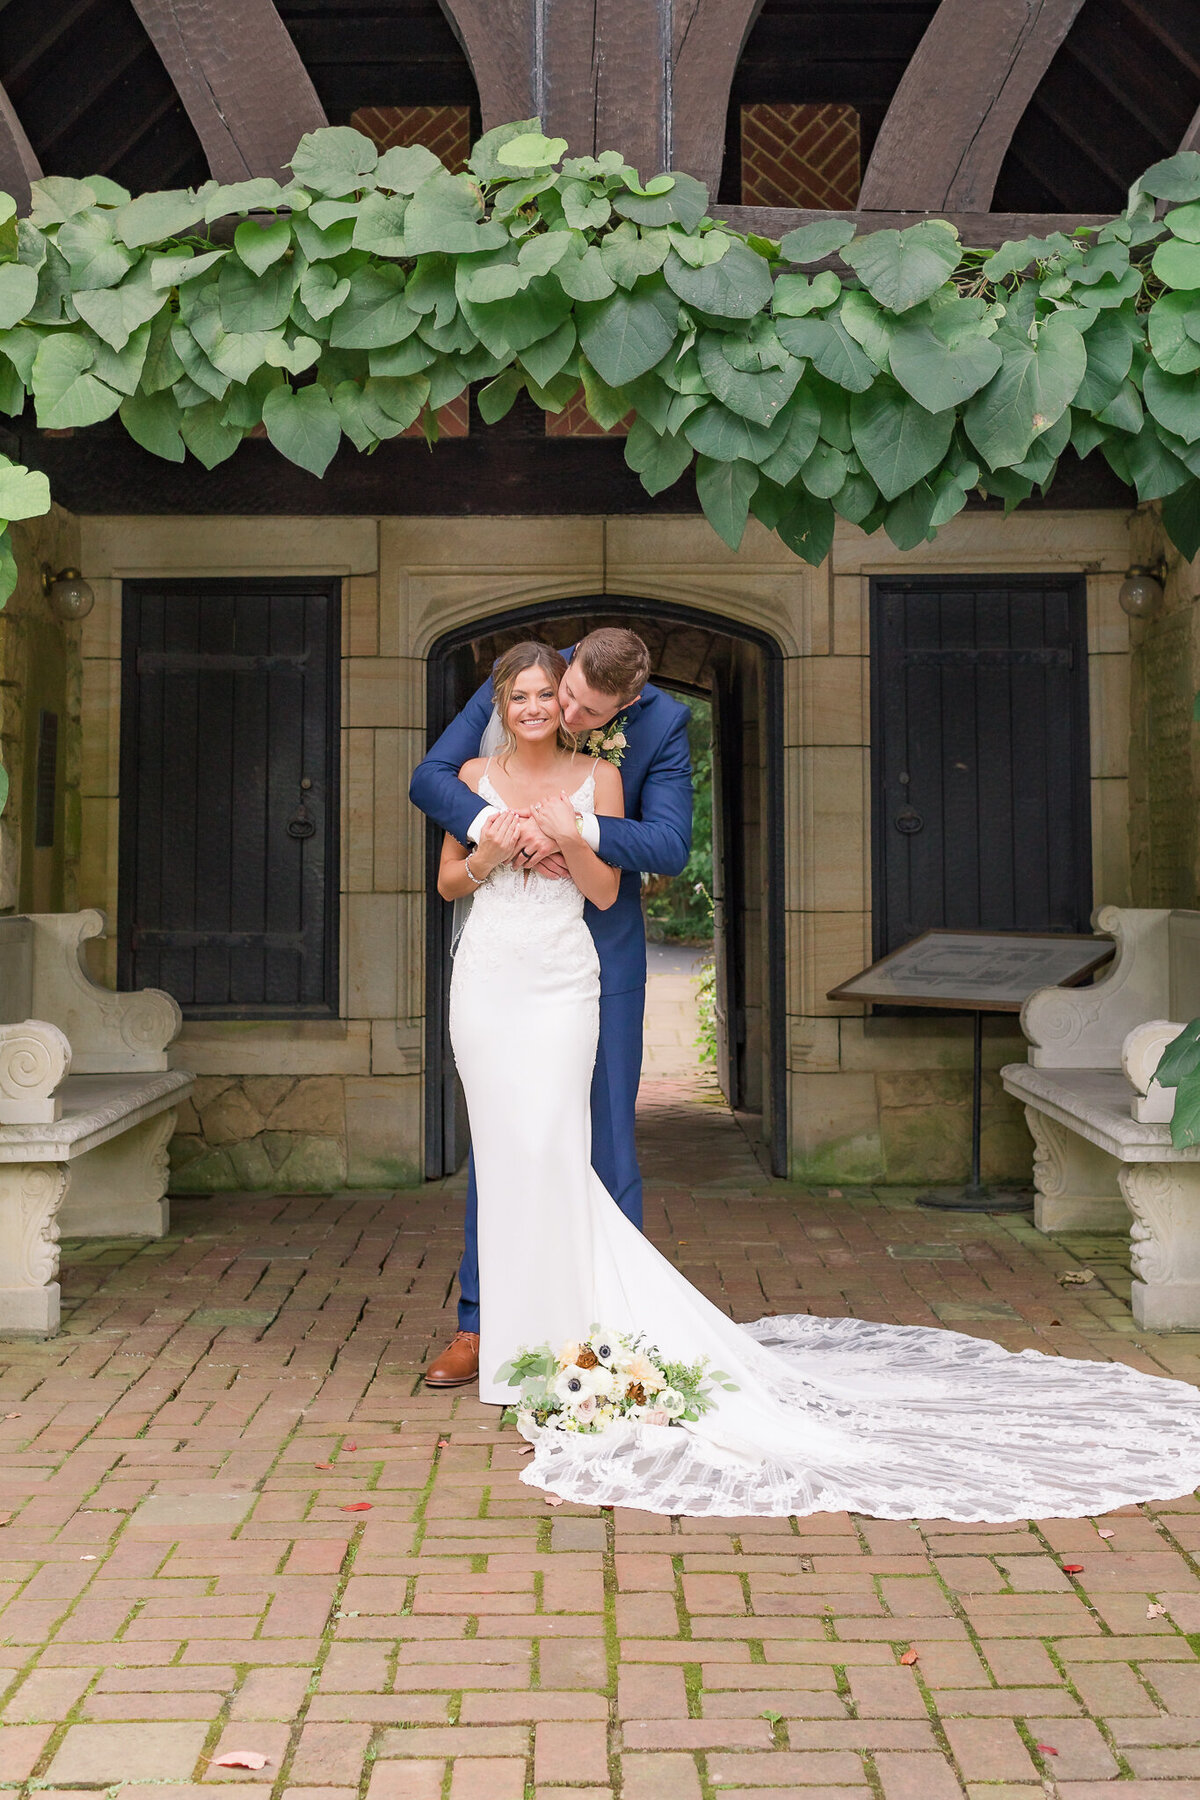 GROOM IN NAVY SUIT SOFTLY EMBRACES HIS NEW BRIDE UNDER AN  ARBOR OF DUTCHMAN'S PIPE VINES